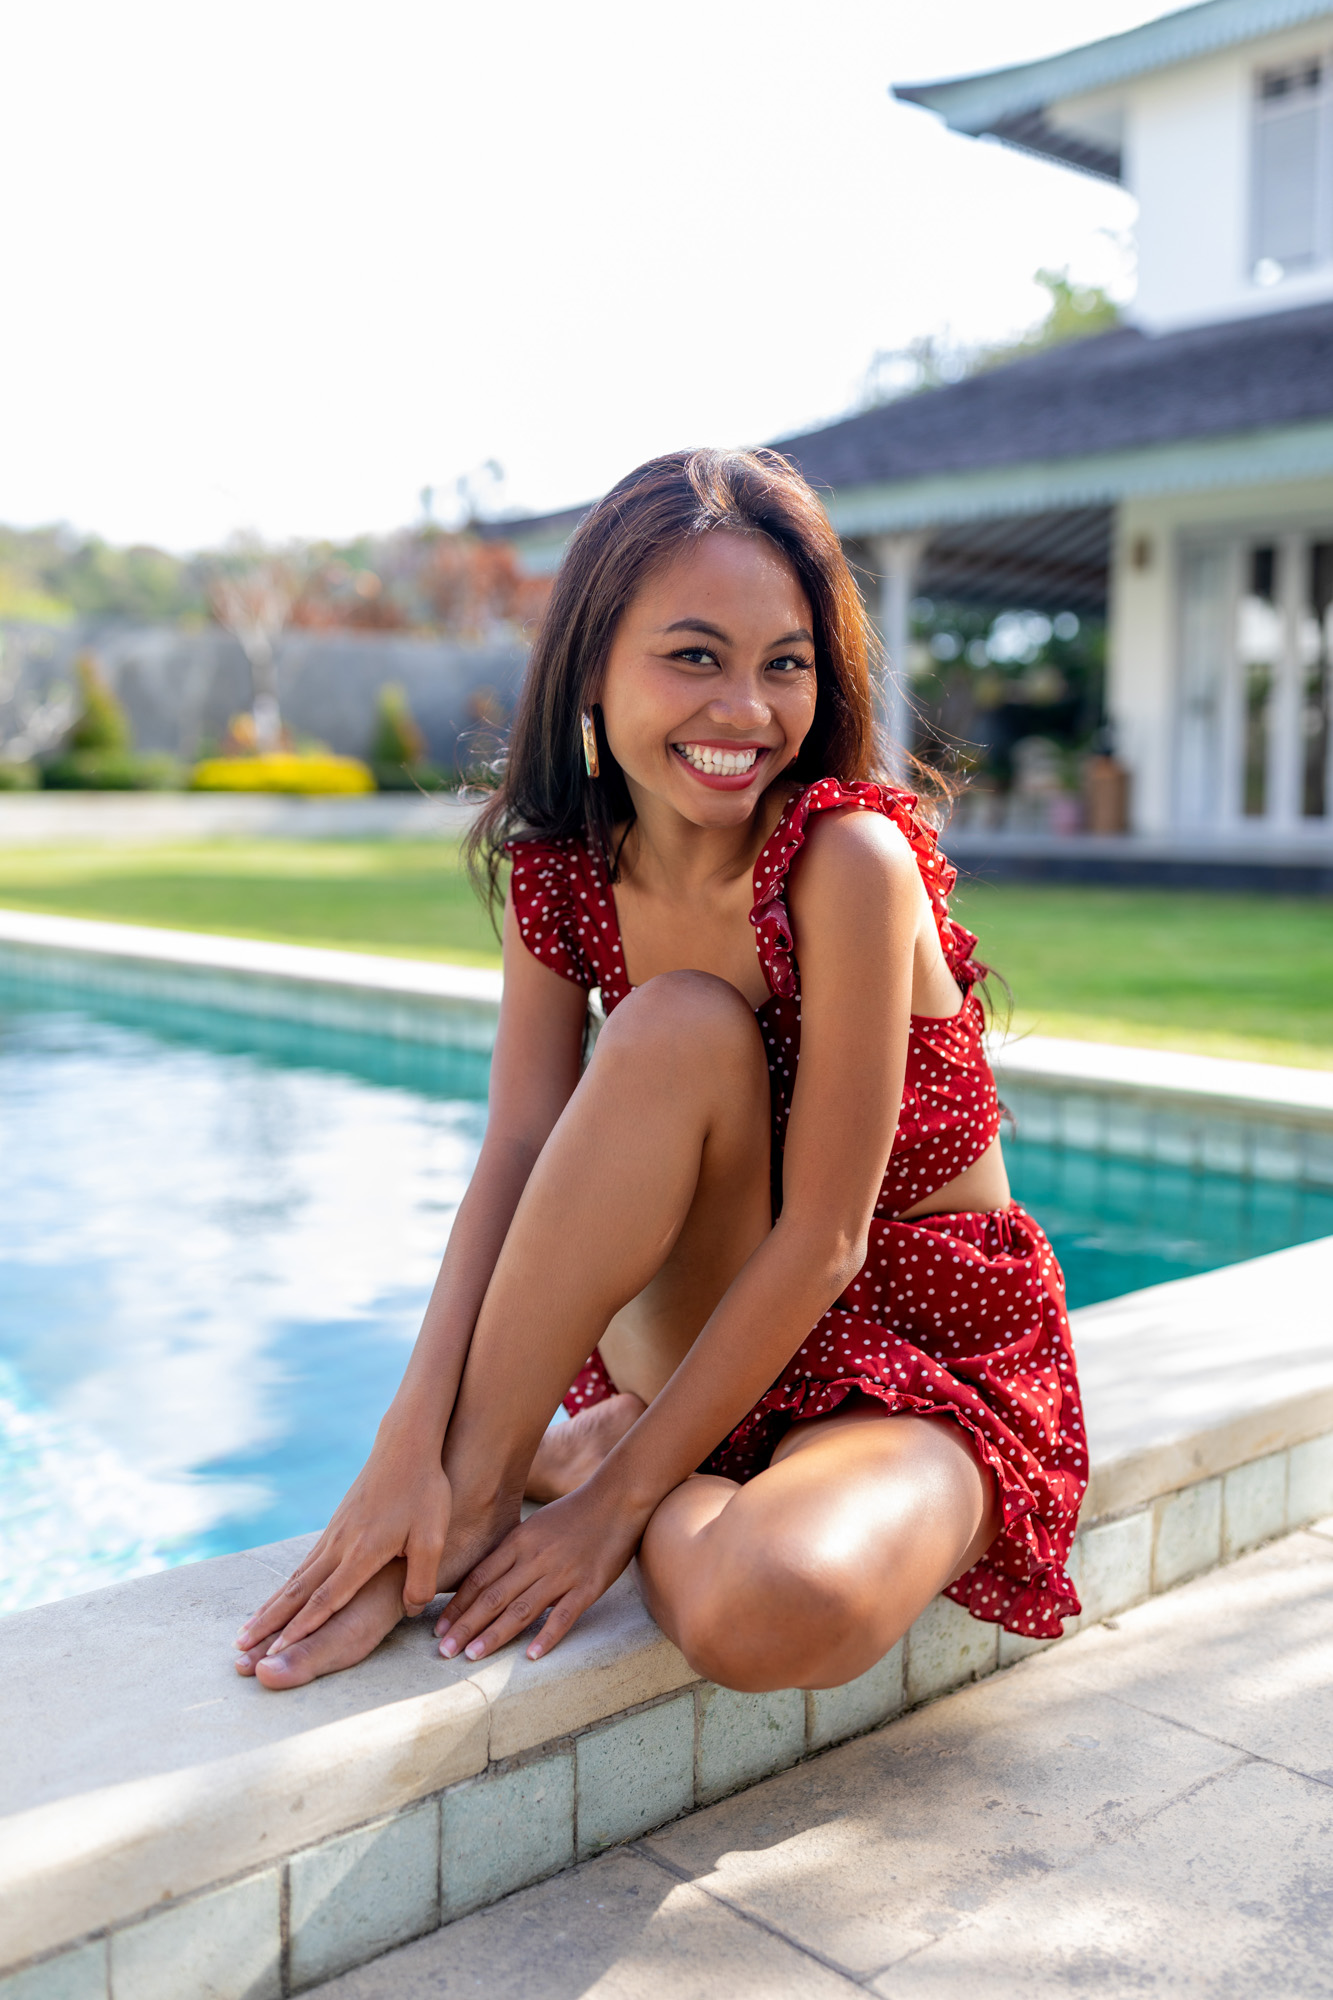 Woman wearing red sits by pool and smiles playfully | Lifestyle Photography | Swimwear Photography | Asian Bali Model | High Key Photography | Fashion Photography